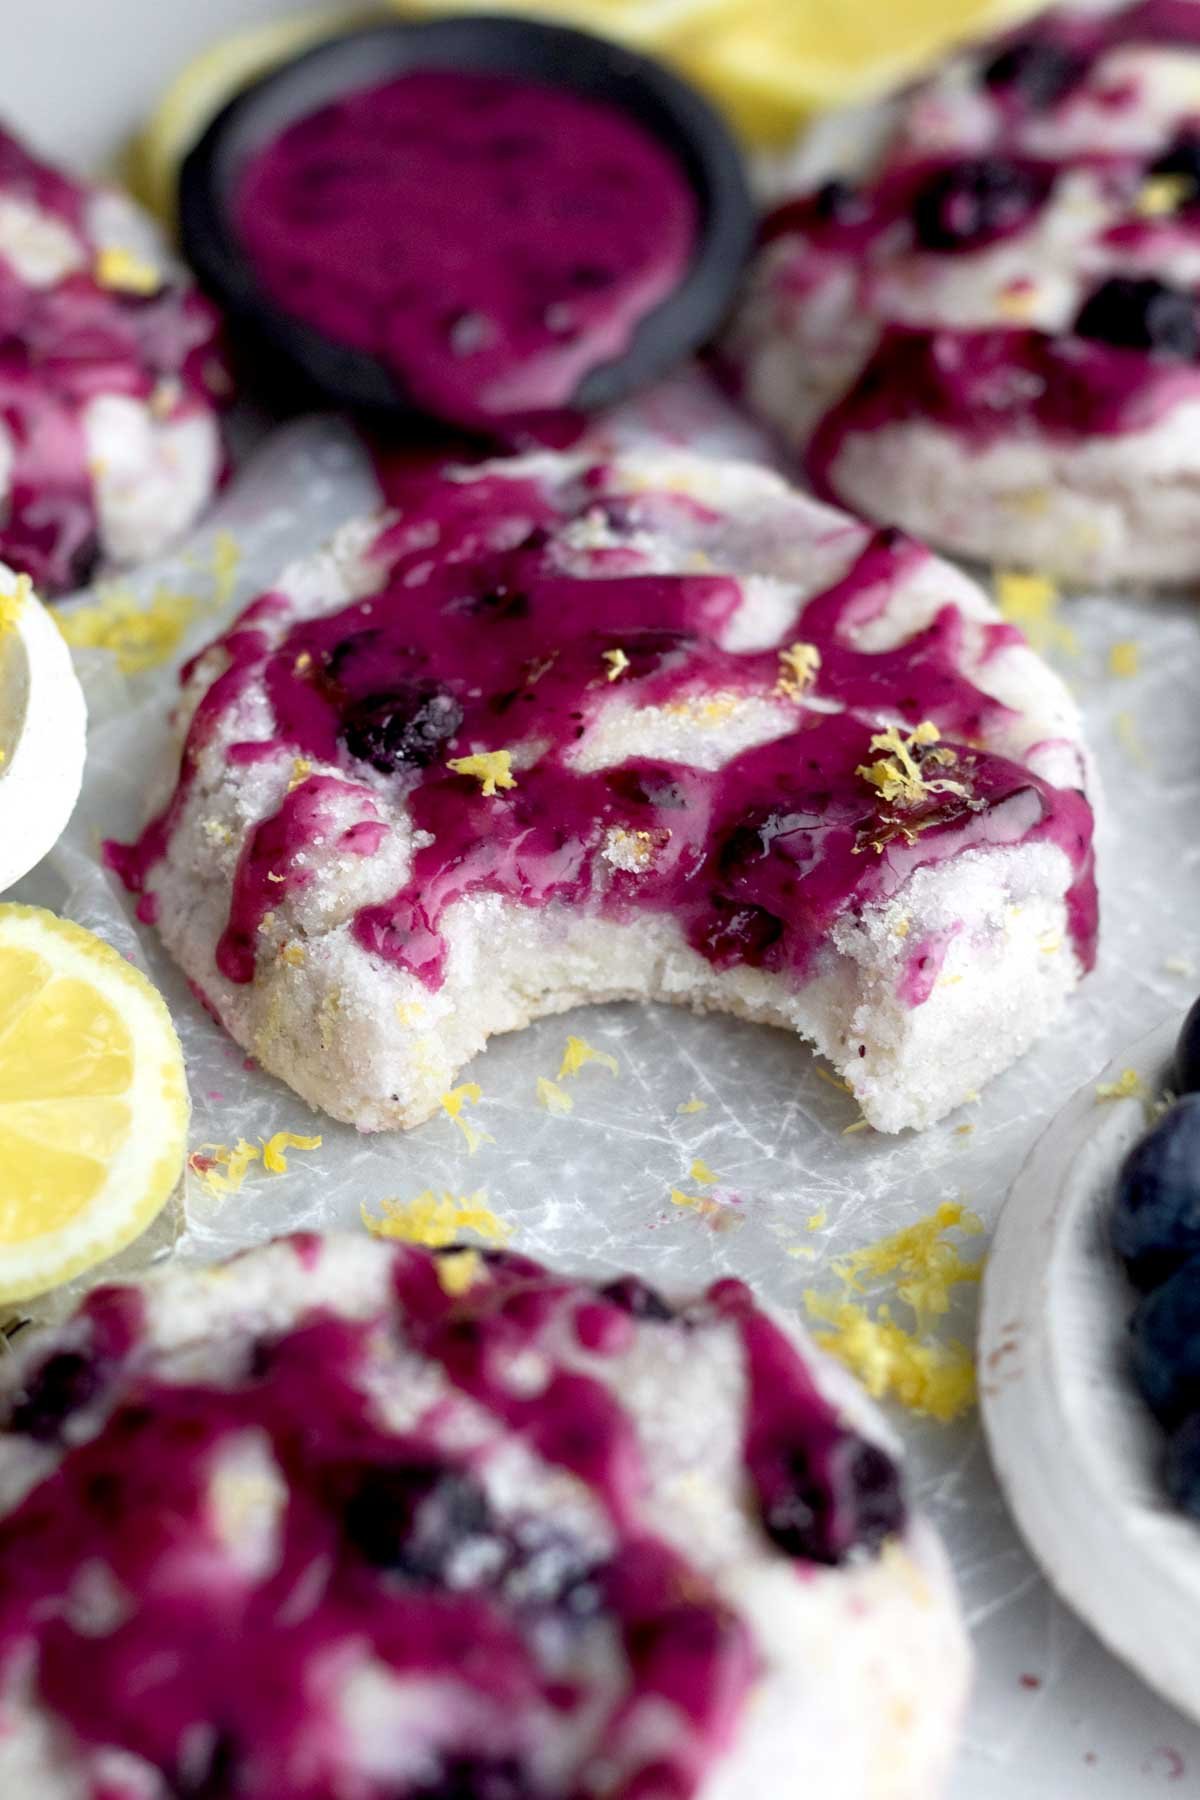 TangyTangy blueberry glaze drizzled on this whiter sugar cookie made with regular frozen blueberries. blueberry glaze drizzled on this cookie made with regular frozen blueberries.